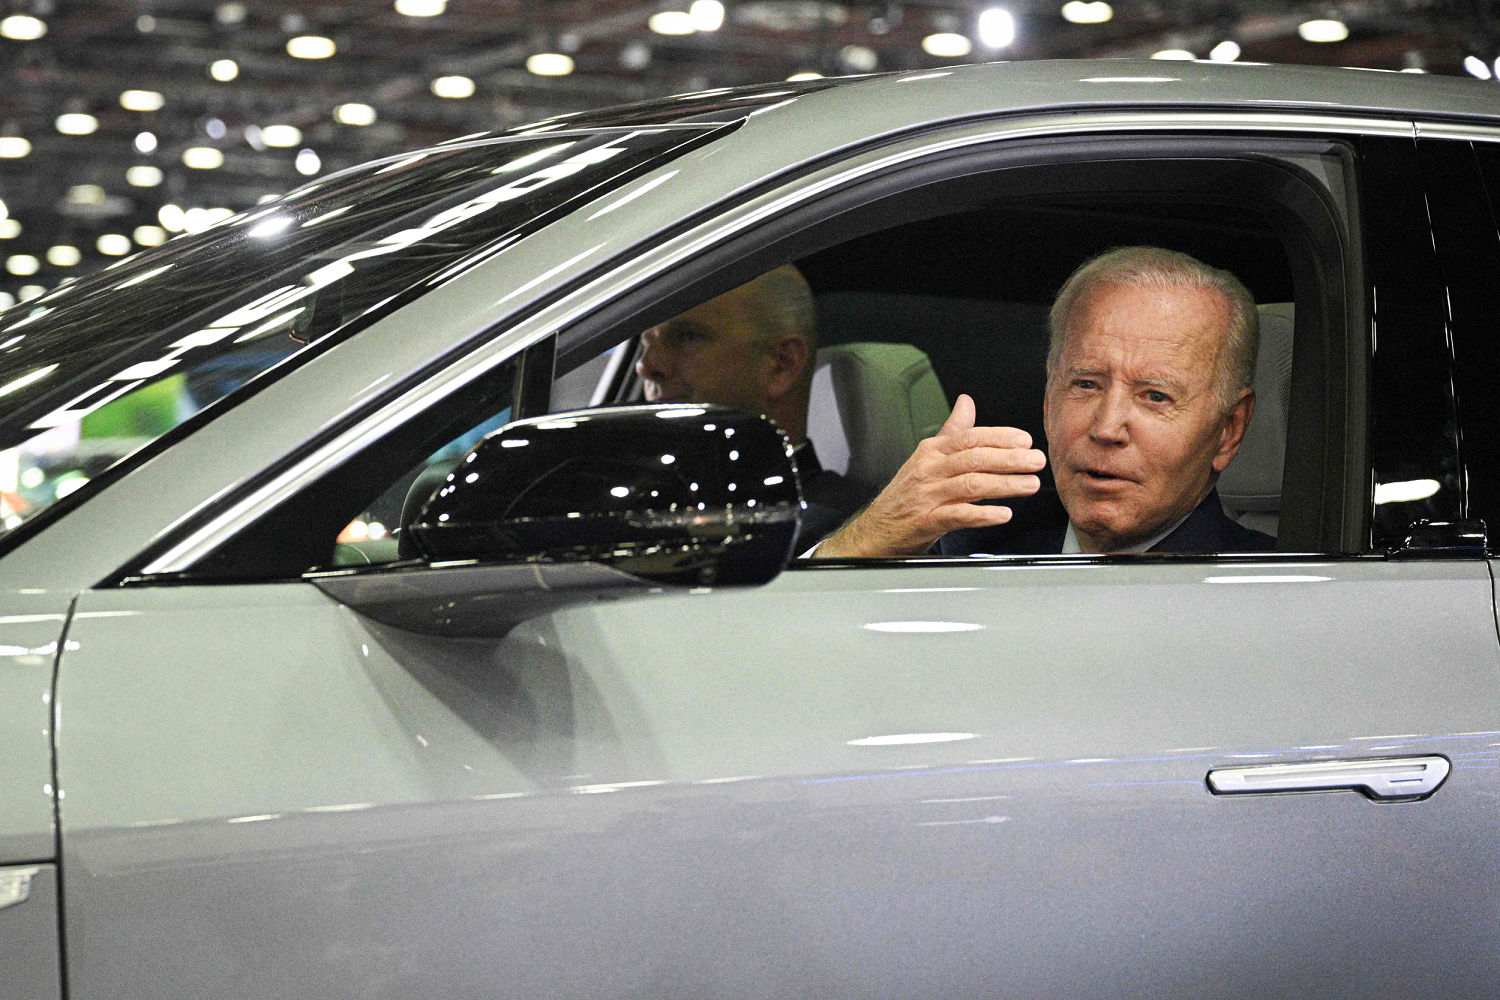 Fuel industry group targets Biden and Democrats in key states over emissions standards